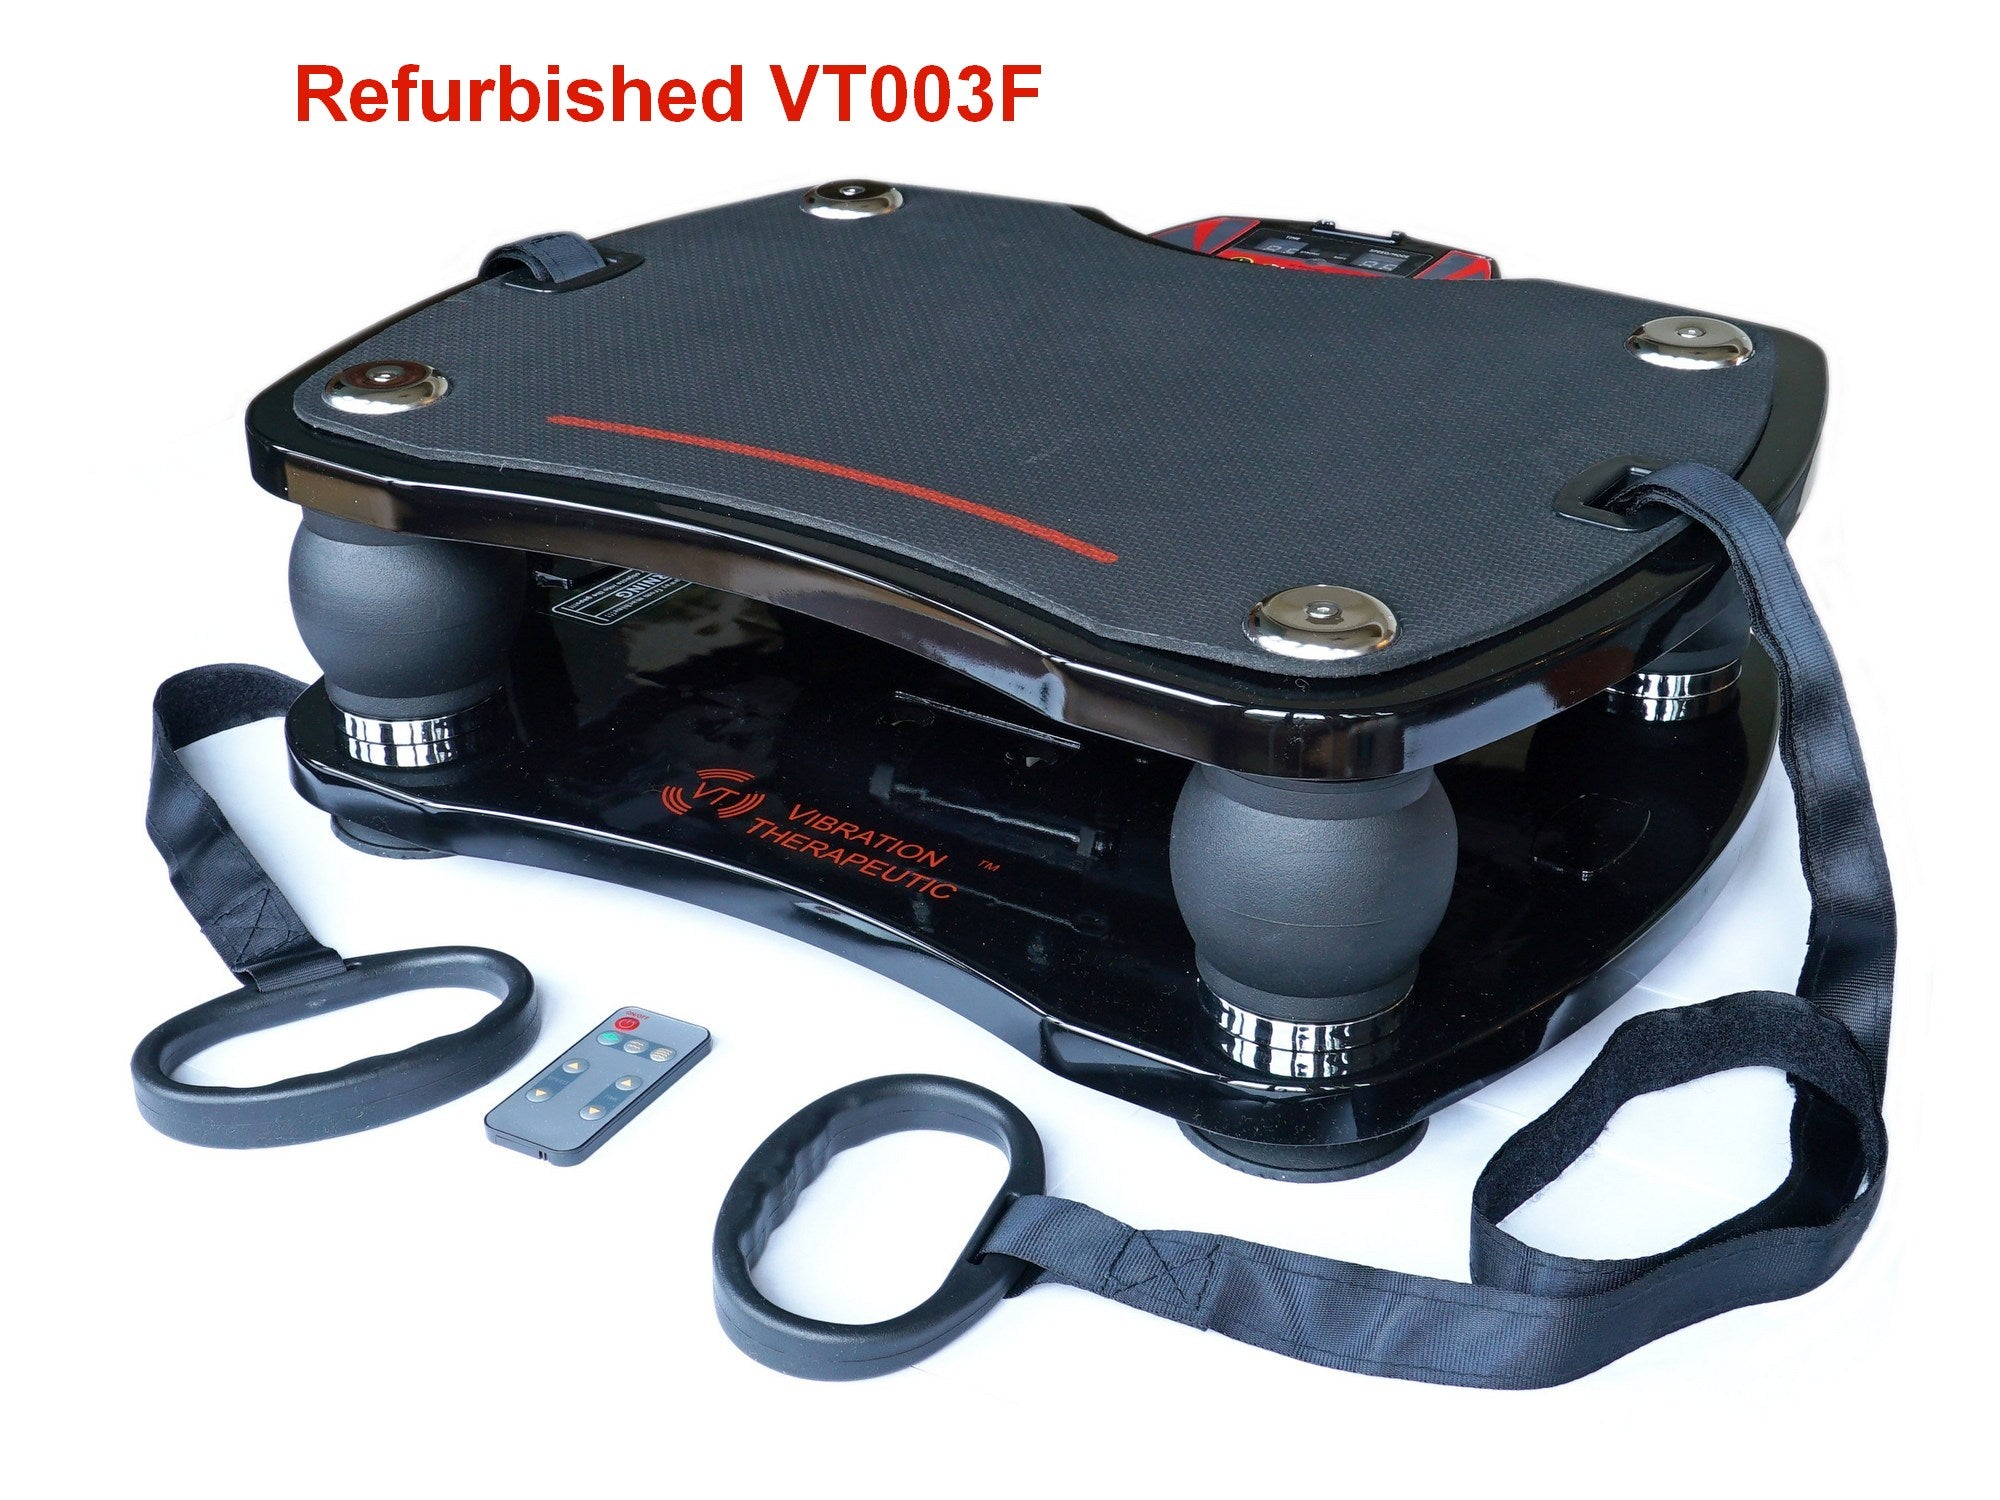 VT003F High Frequency Linear Vibration Plate, 15 - 40Hz Refurbished